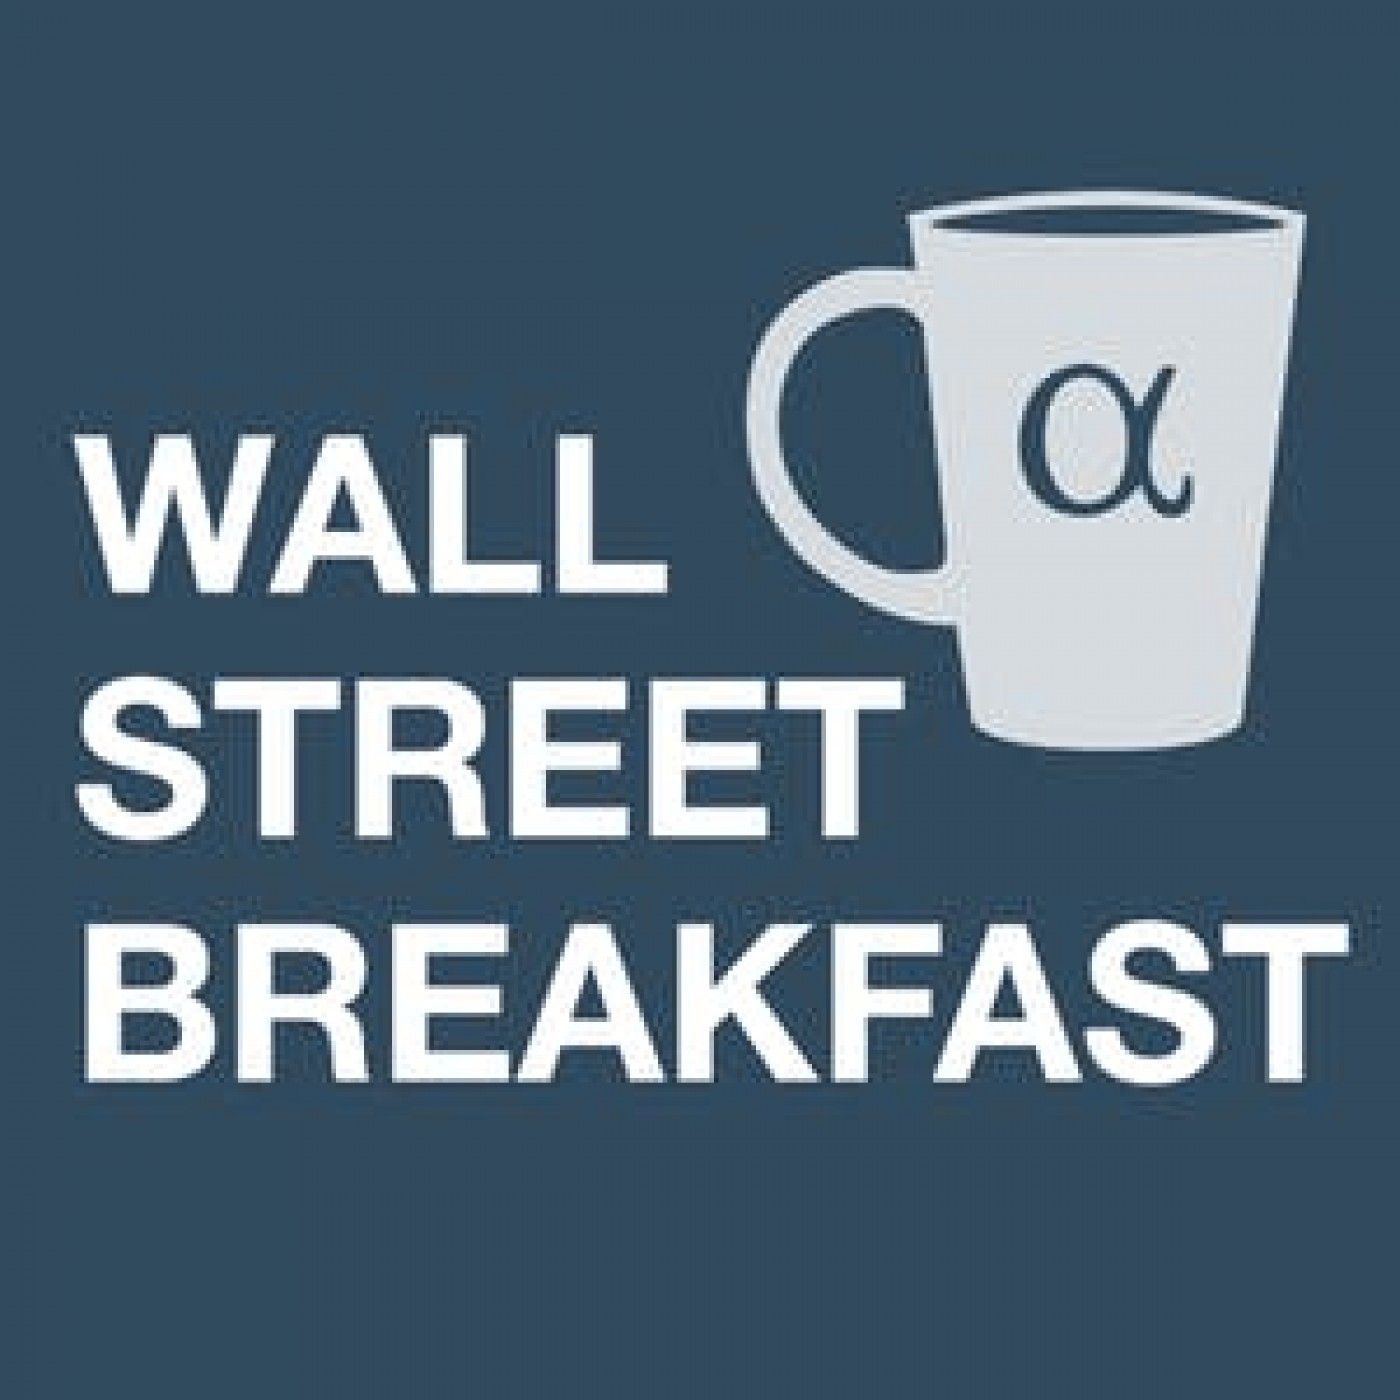 Wall Street Breakfast June 23: Report says U.S. Refiners to Urge Biden Administration Not to Ban Fuel Exports